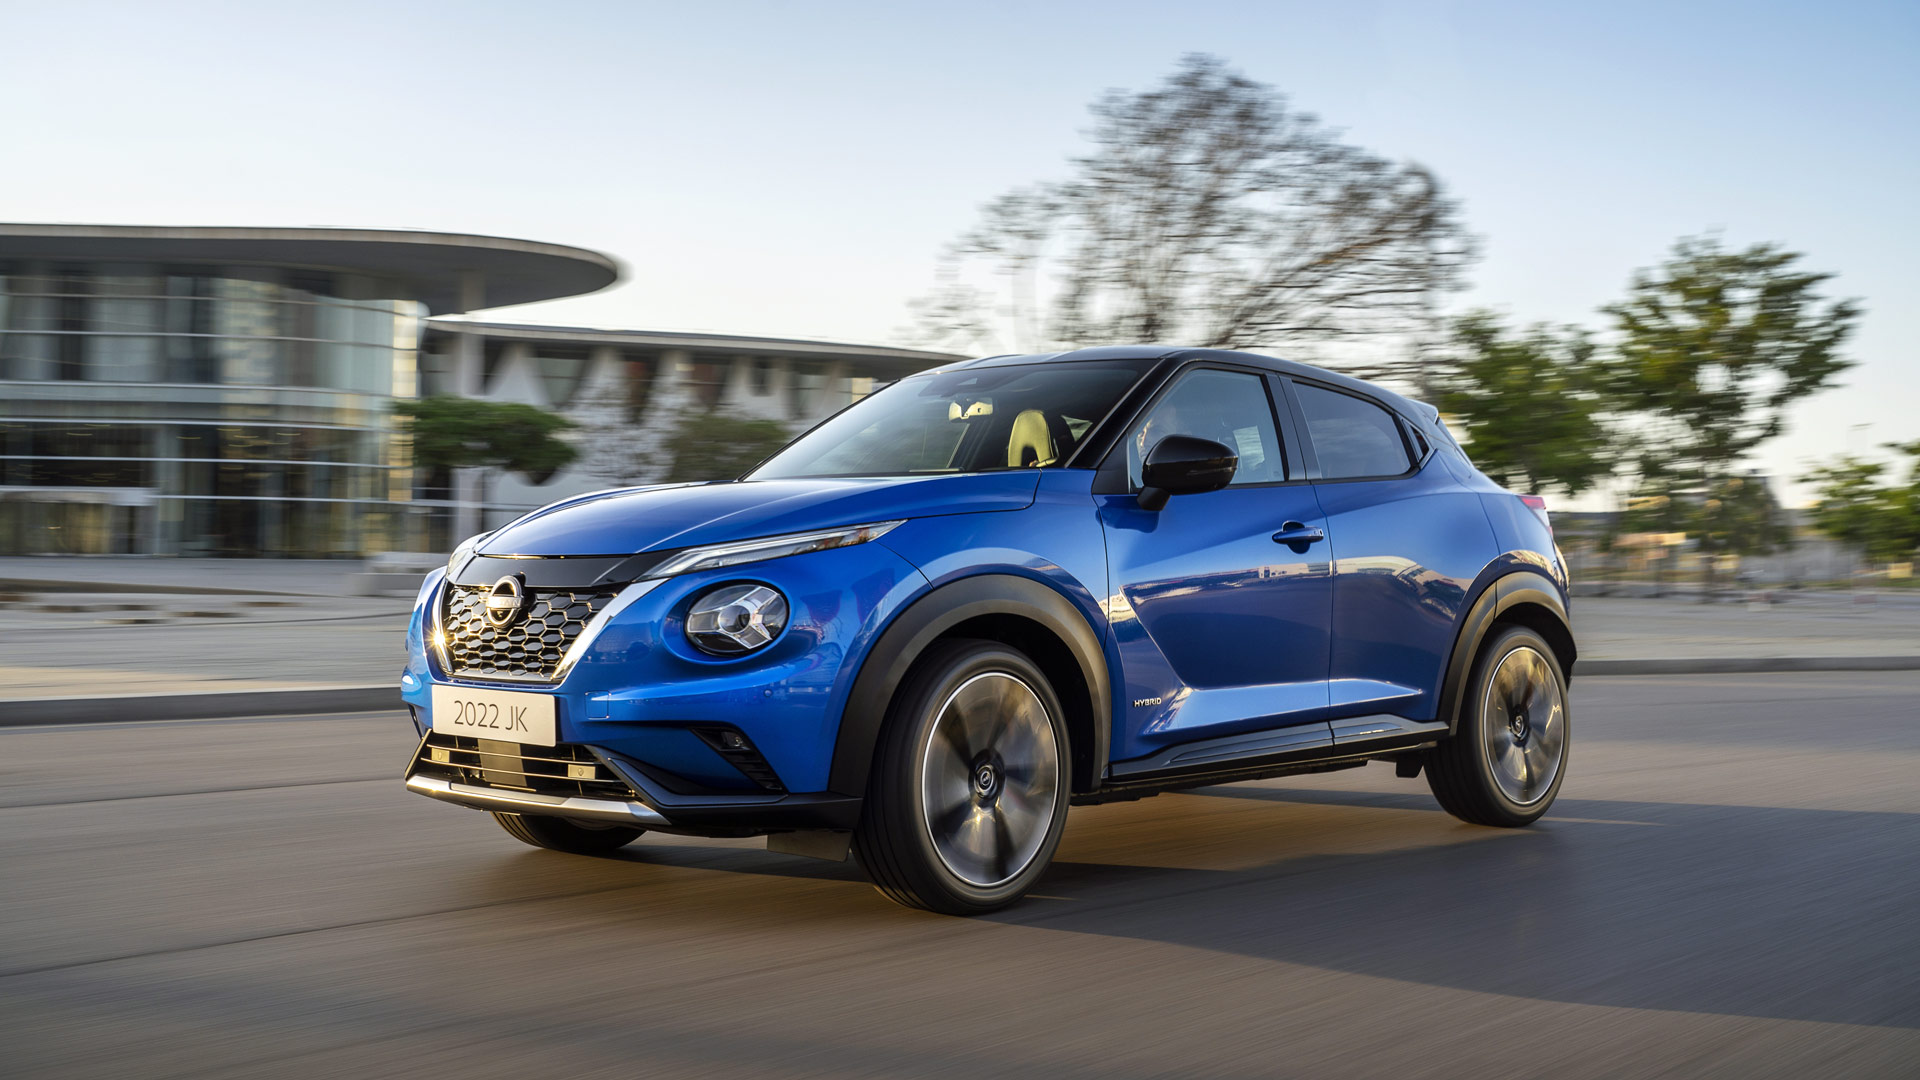 New Nissan Juke Hybrid is now available to order